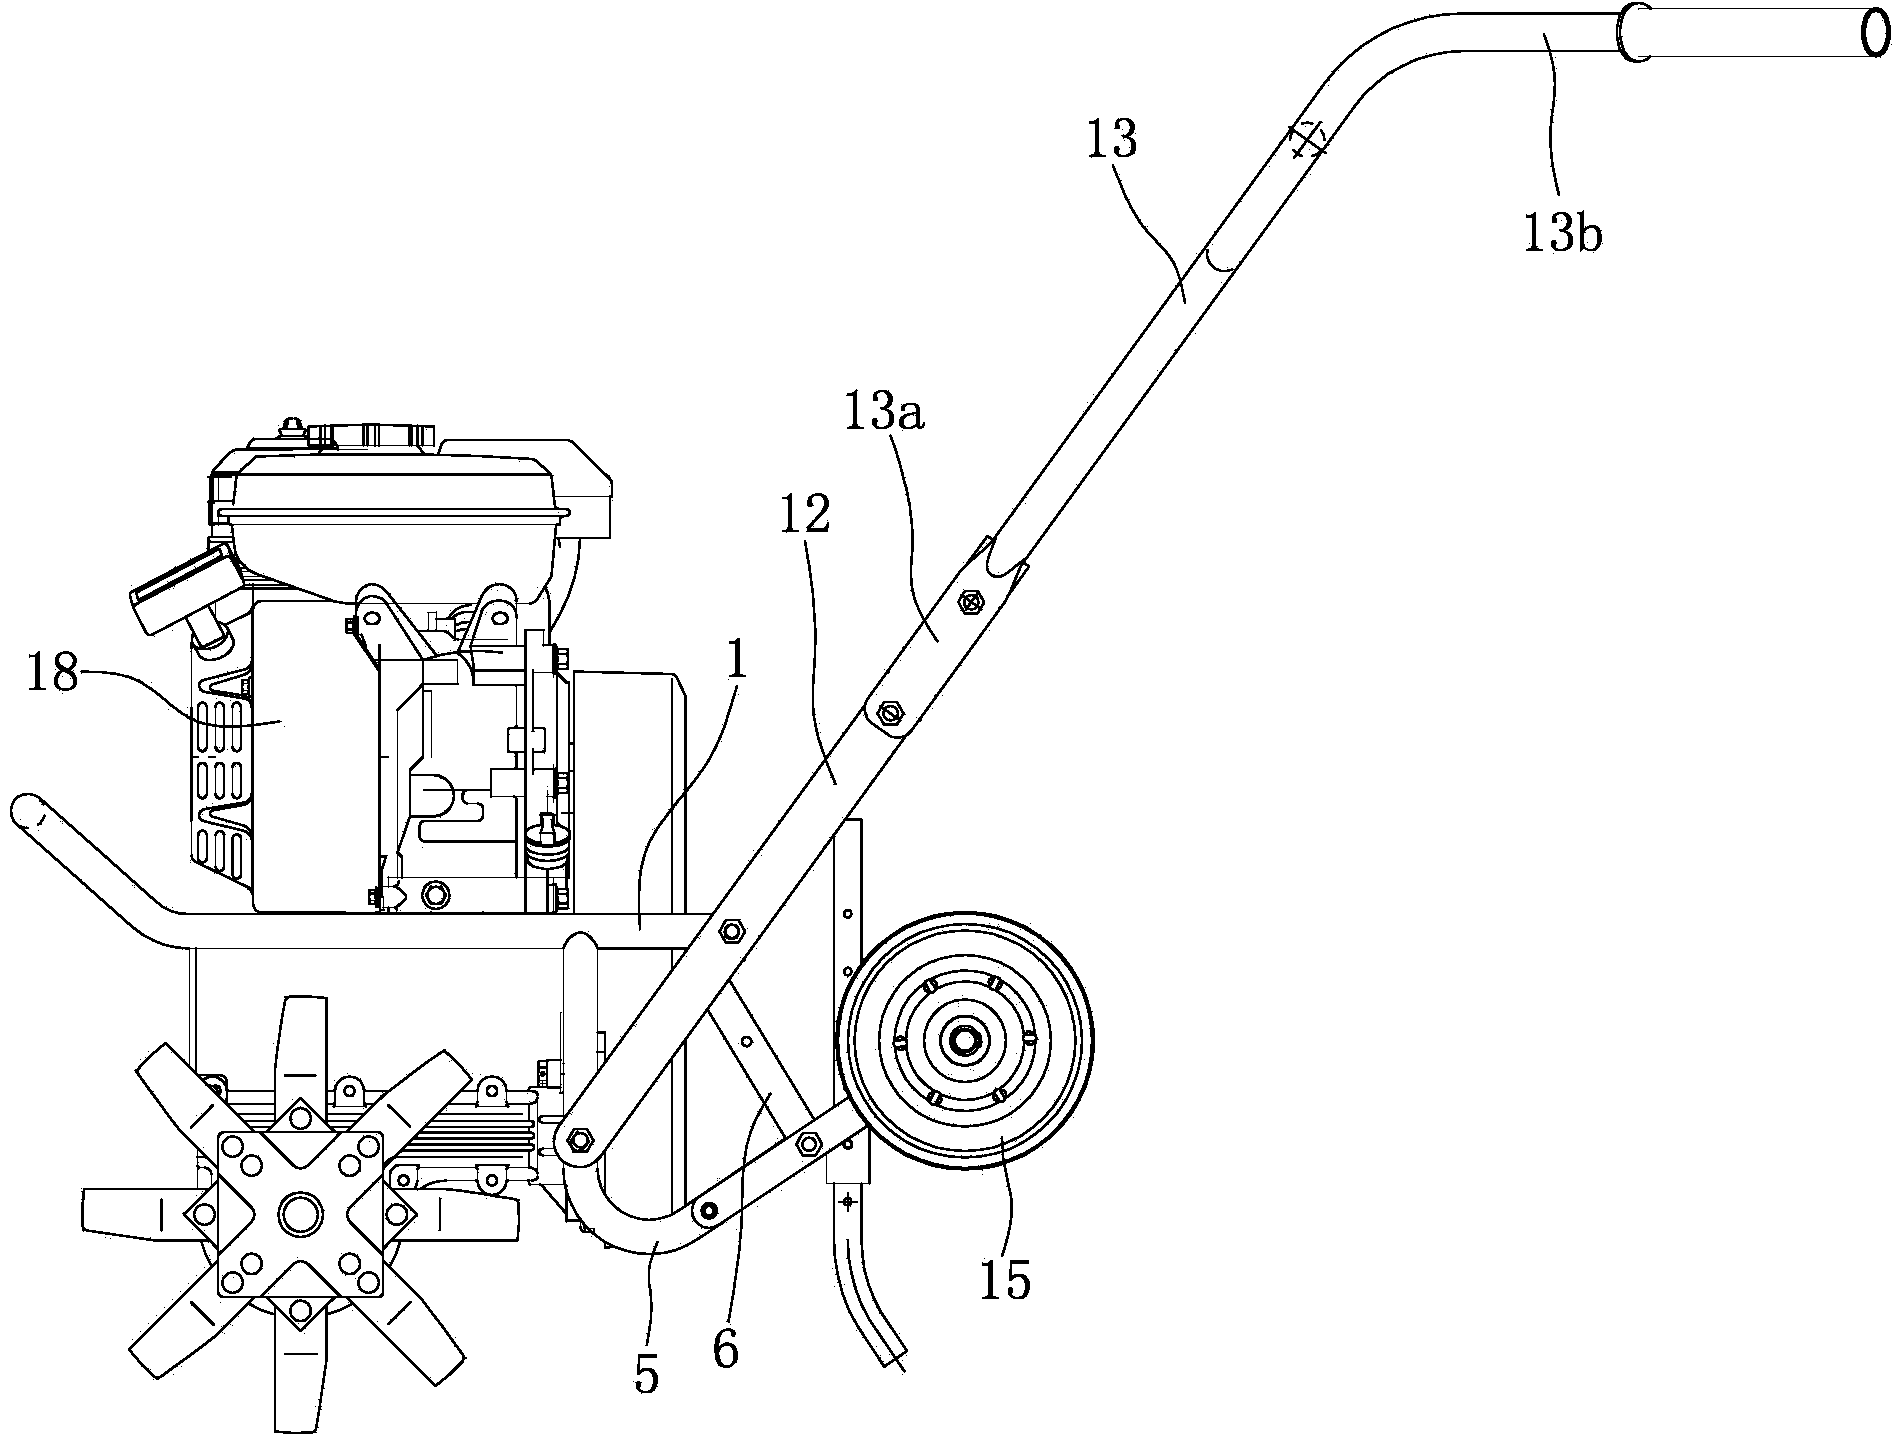 Handle seat, back wheel assembly and engine arrangement structure of portable micro cultivator